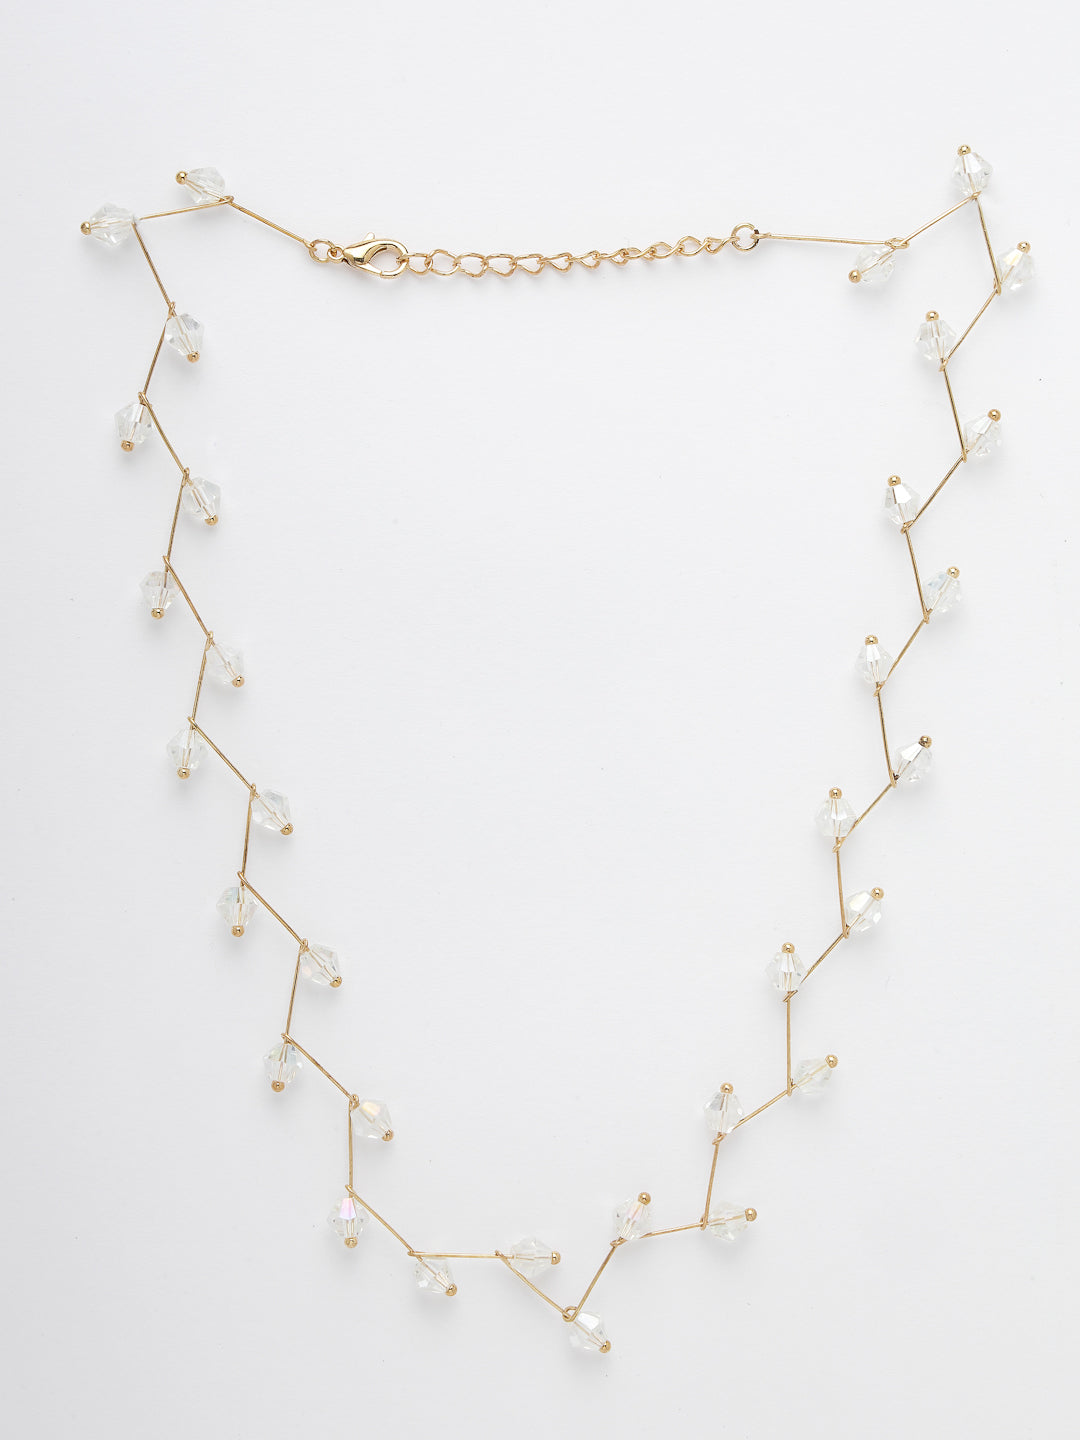 Women's Gold Plated Chain transparent beads Necklace